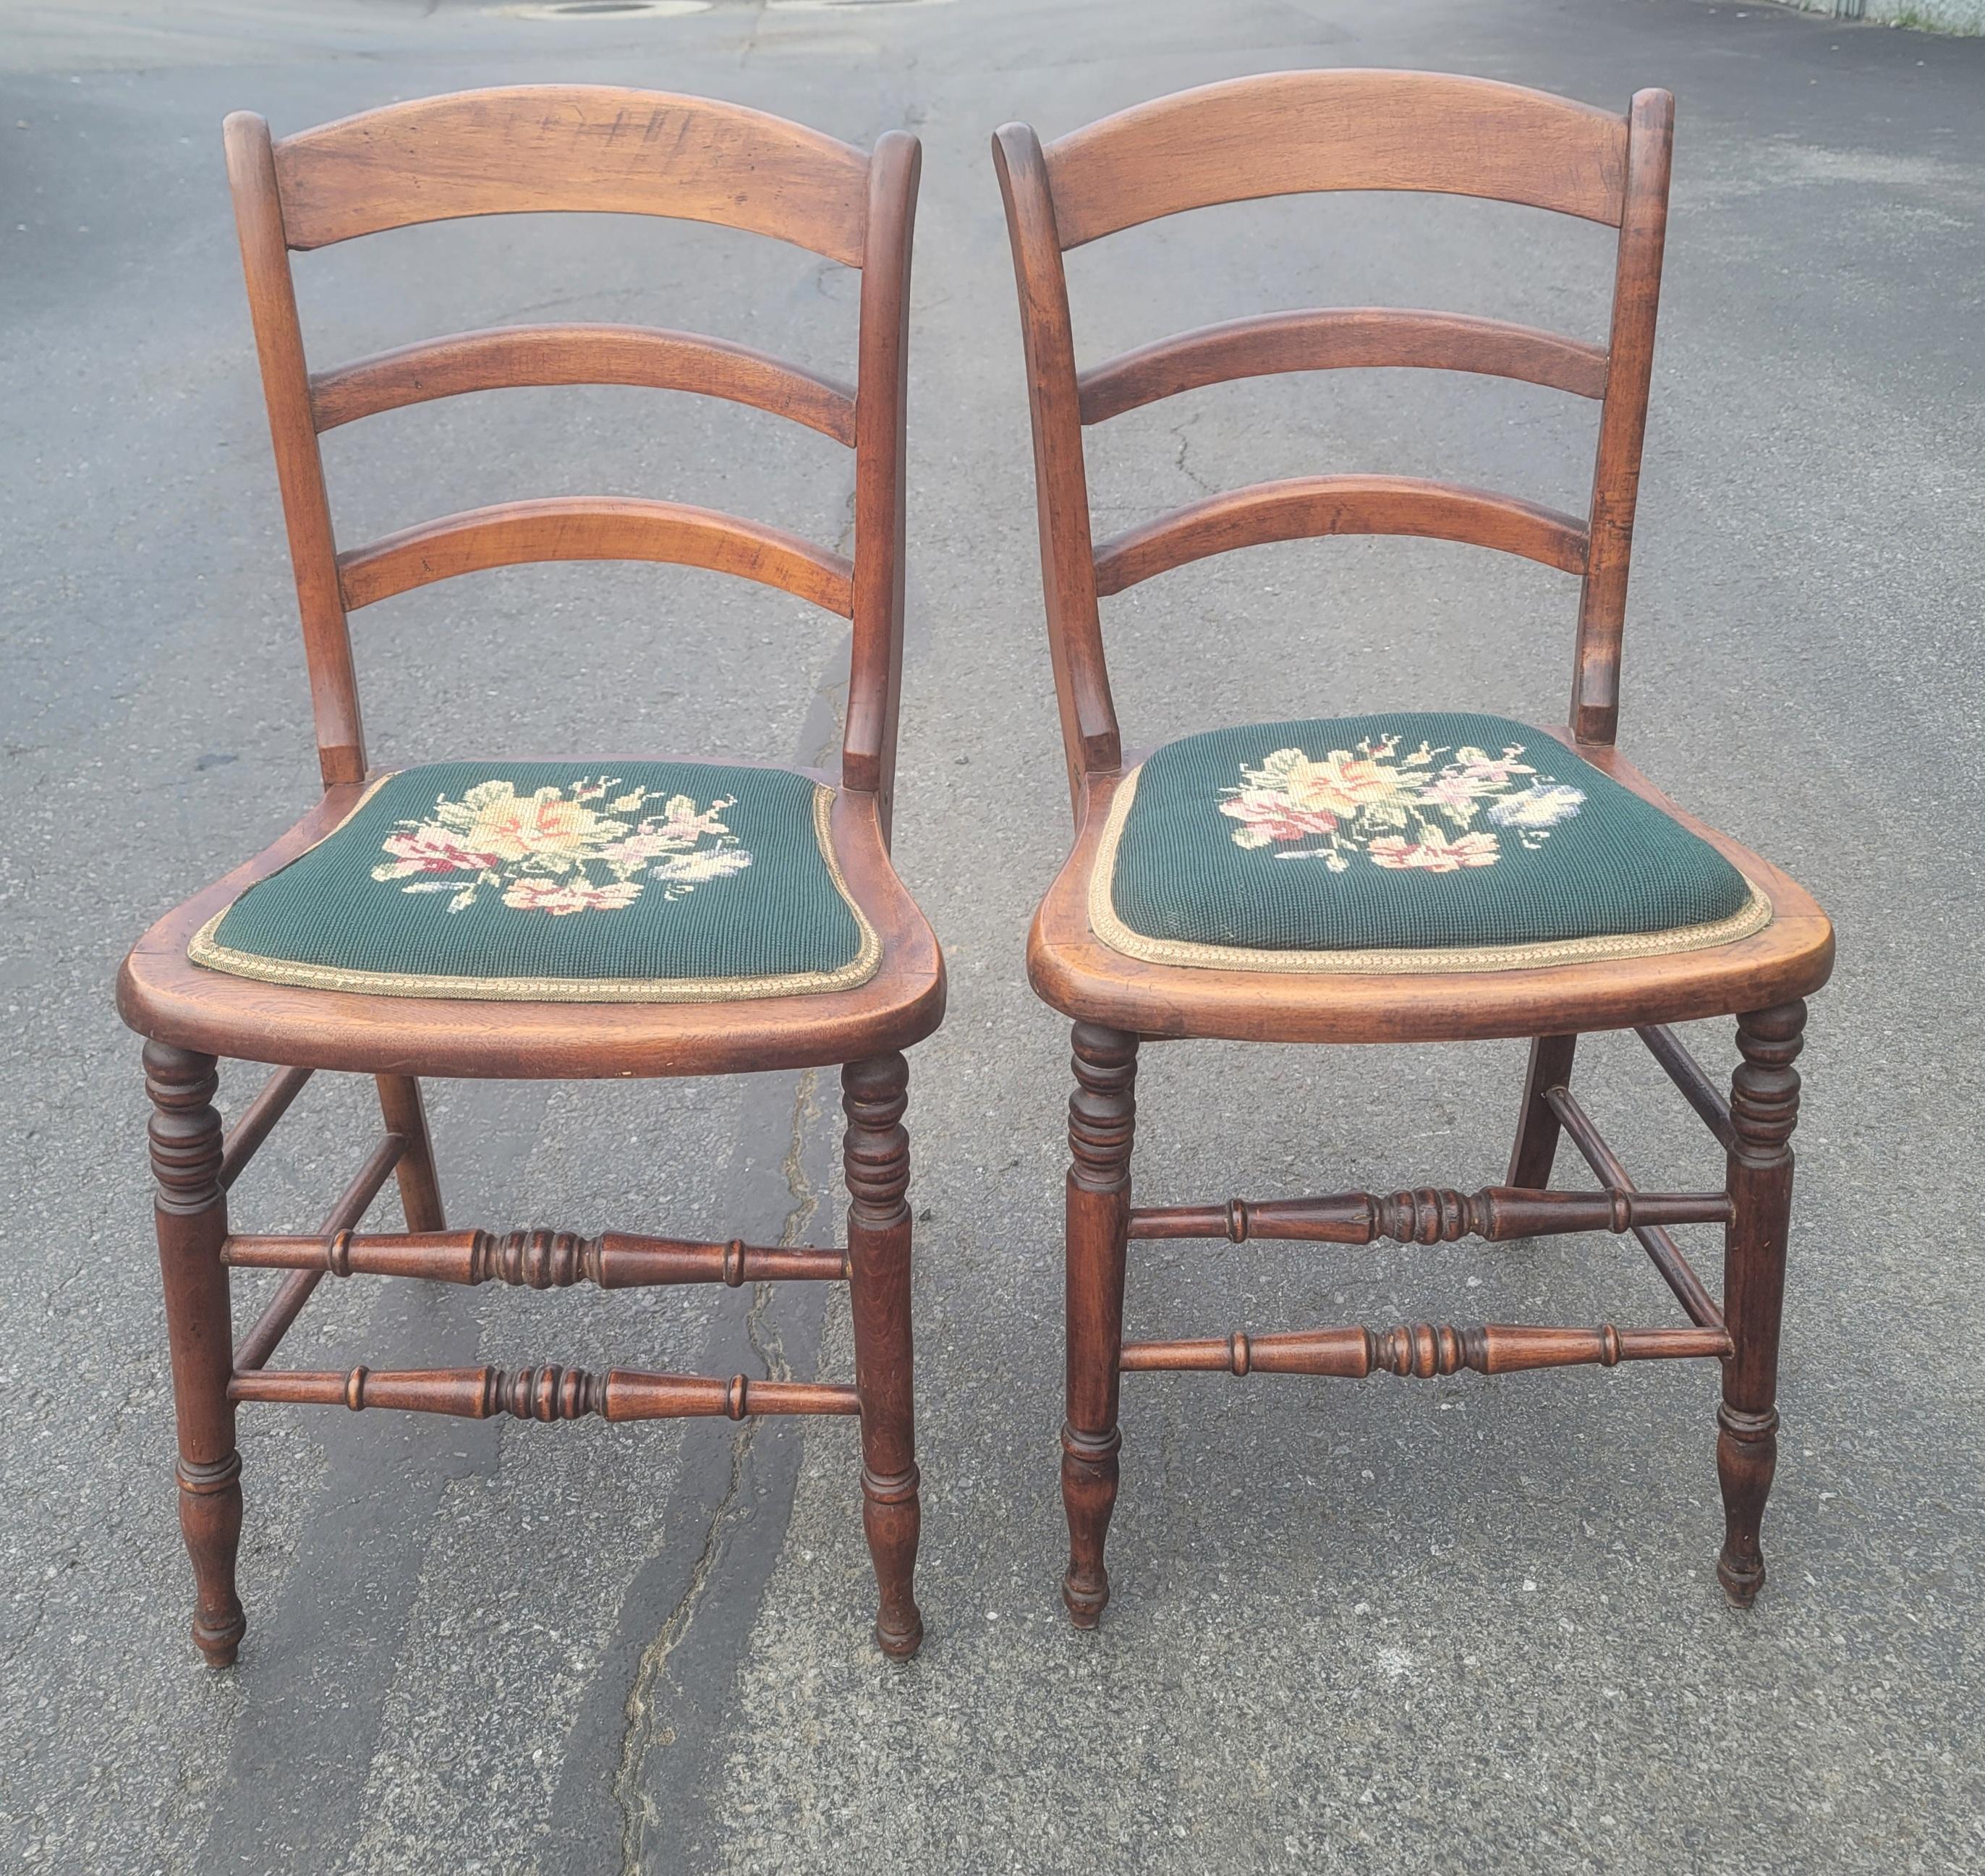 Early 20th Century Victorian Ladder Back Walnut and Needlepoint Seat Side Chairs For Sale 3